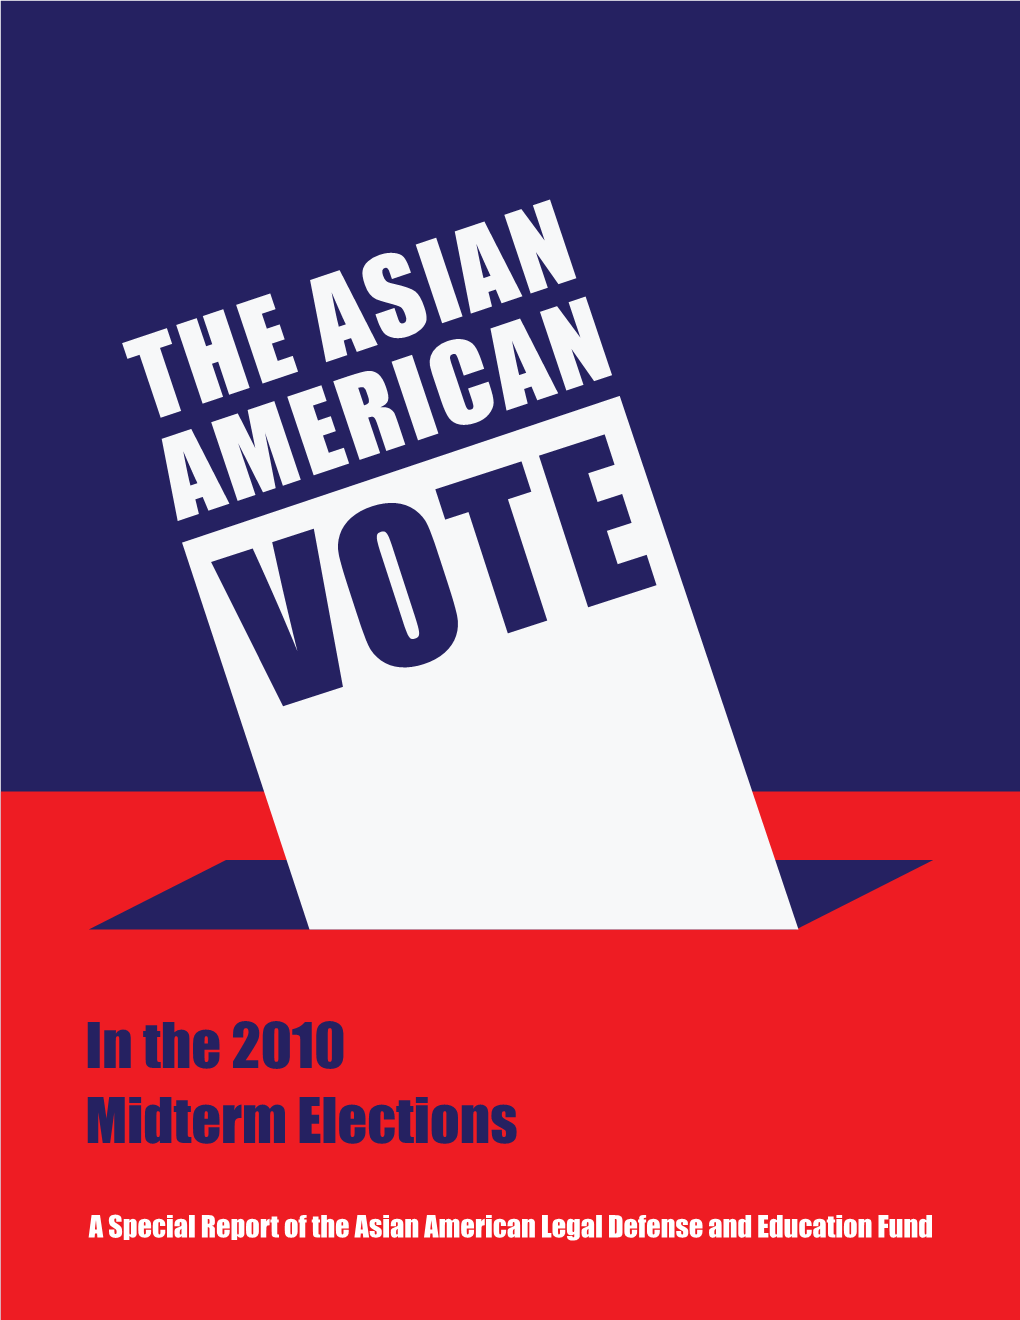 The Asian American Vote